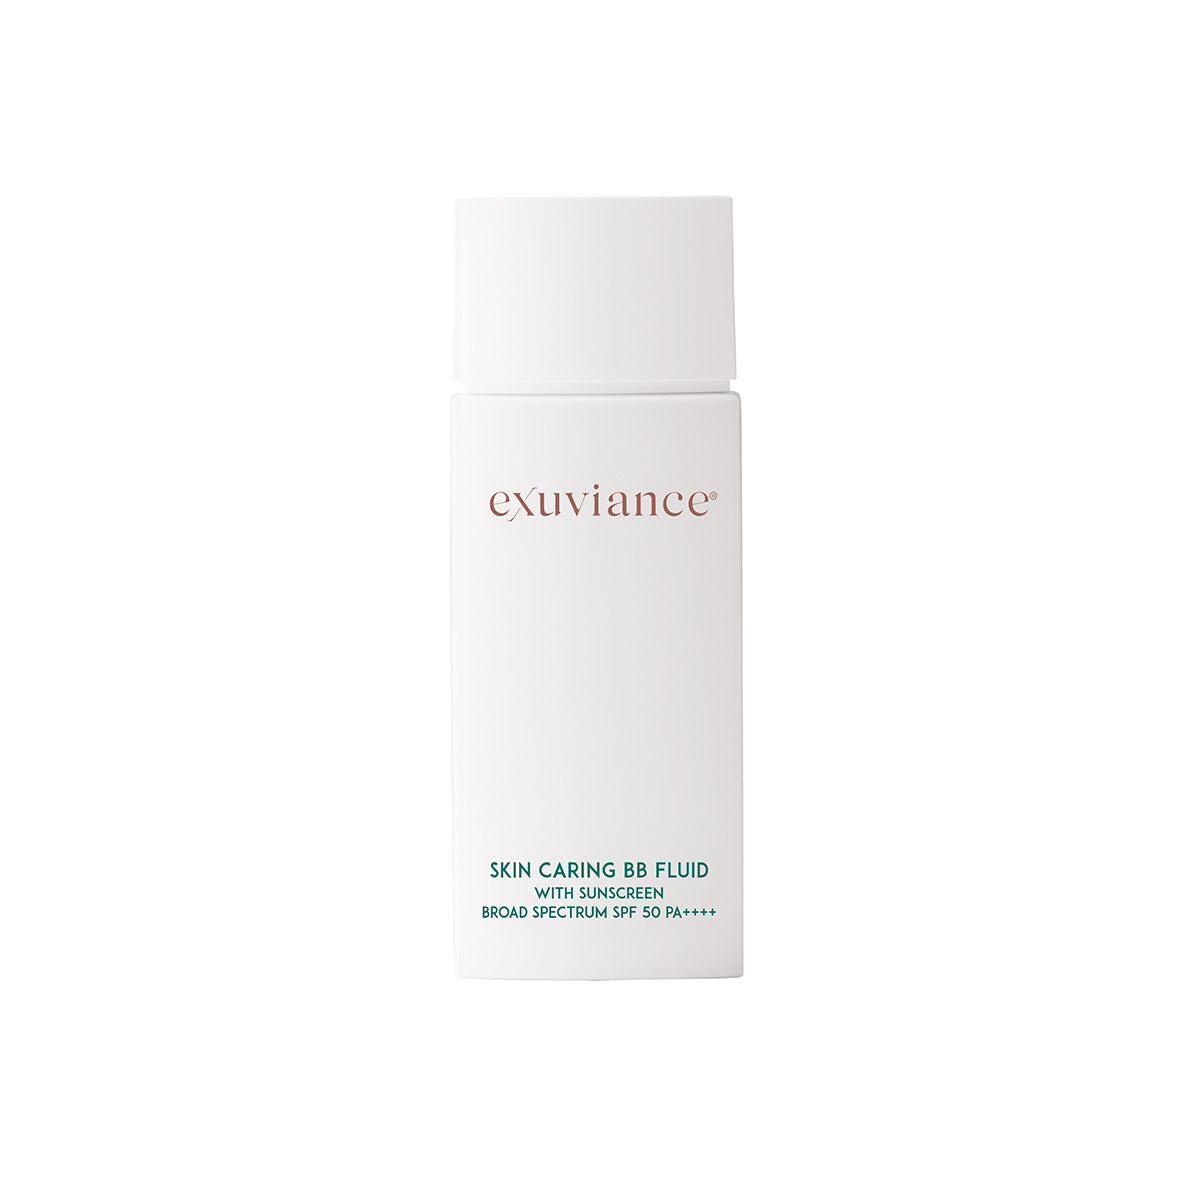 Skin Caring BB Fluid with Sunscreen Broad Spectrum SPF 50 PA++++, 50ml